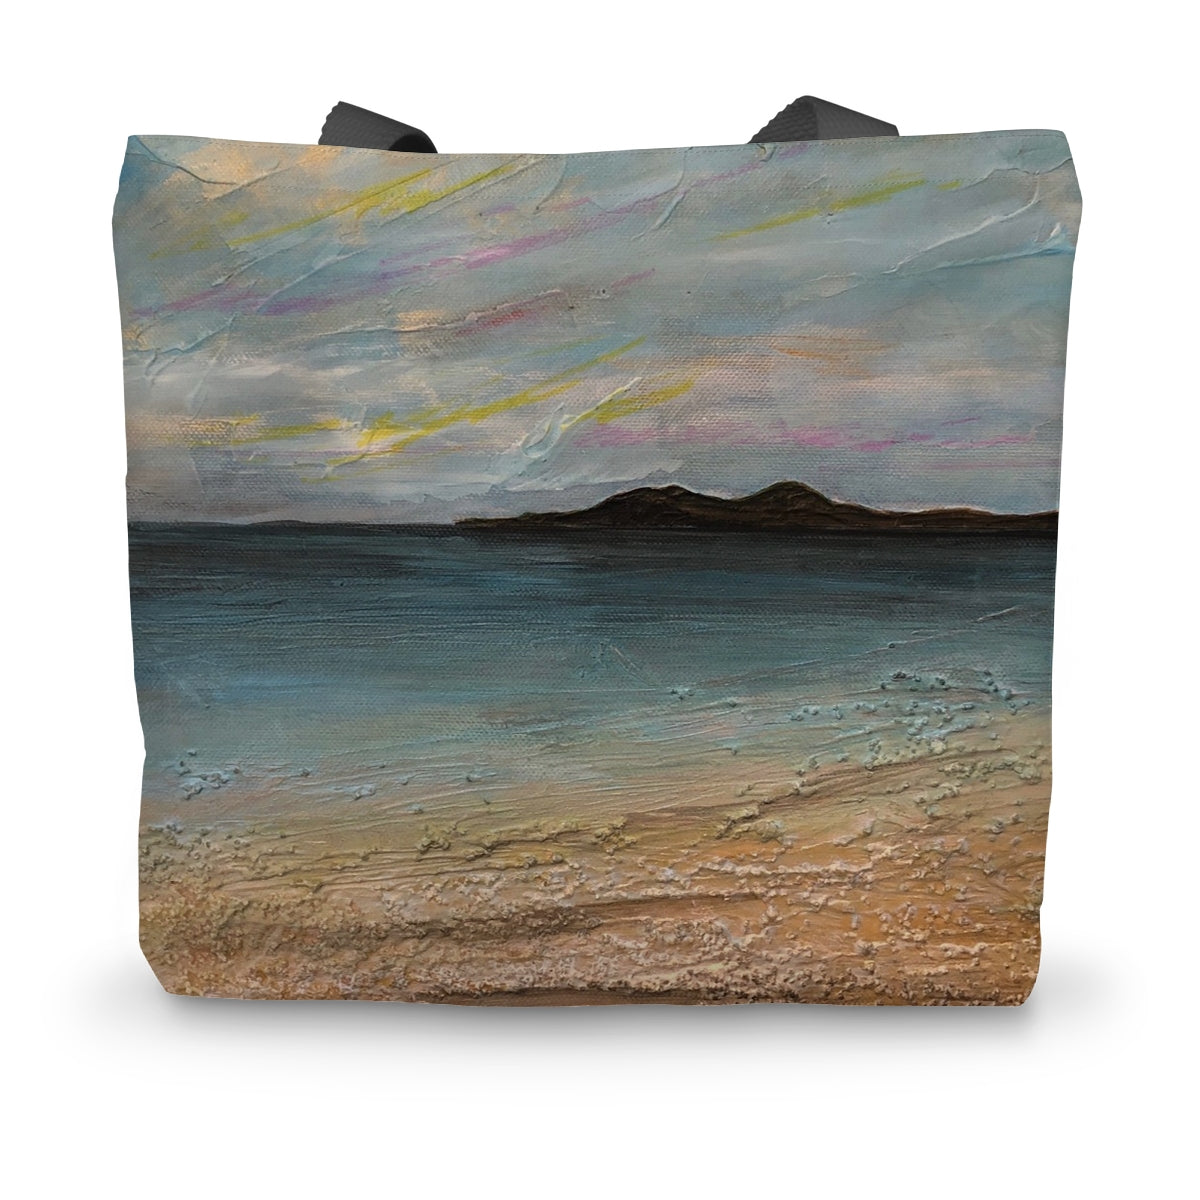 Garrynamonie Beach South Uist Art Gifts Canvas Tote Bag-Bags-Hebridean Islands Art Gallery-14"x18.5"-Paintings, Prints, Homeware, Art Gifts From Scotland By Scottish Artist Kevin Hunter